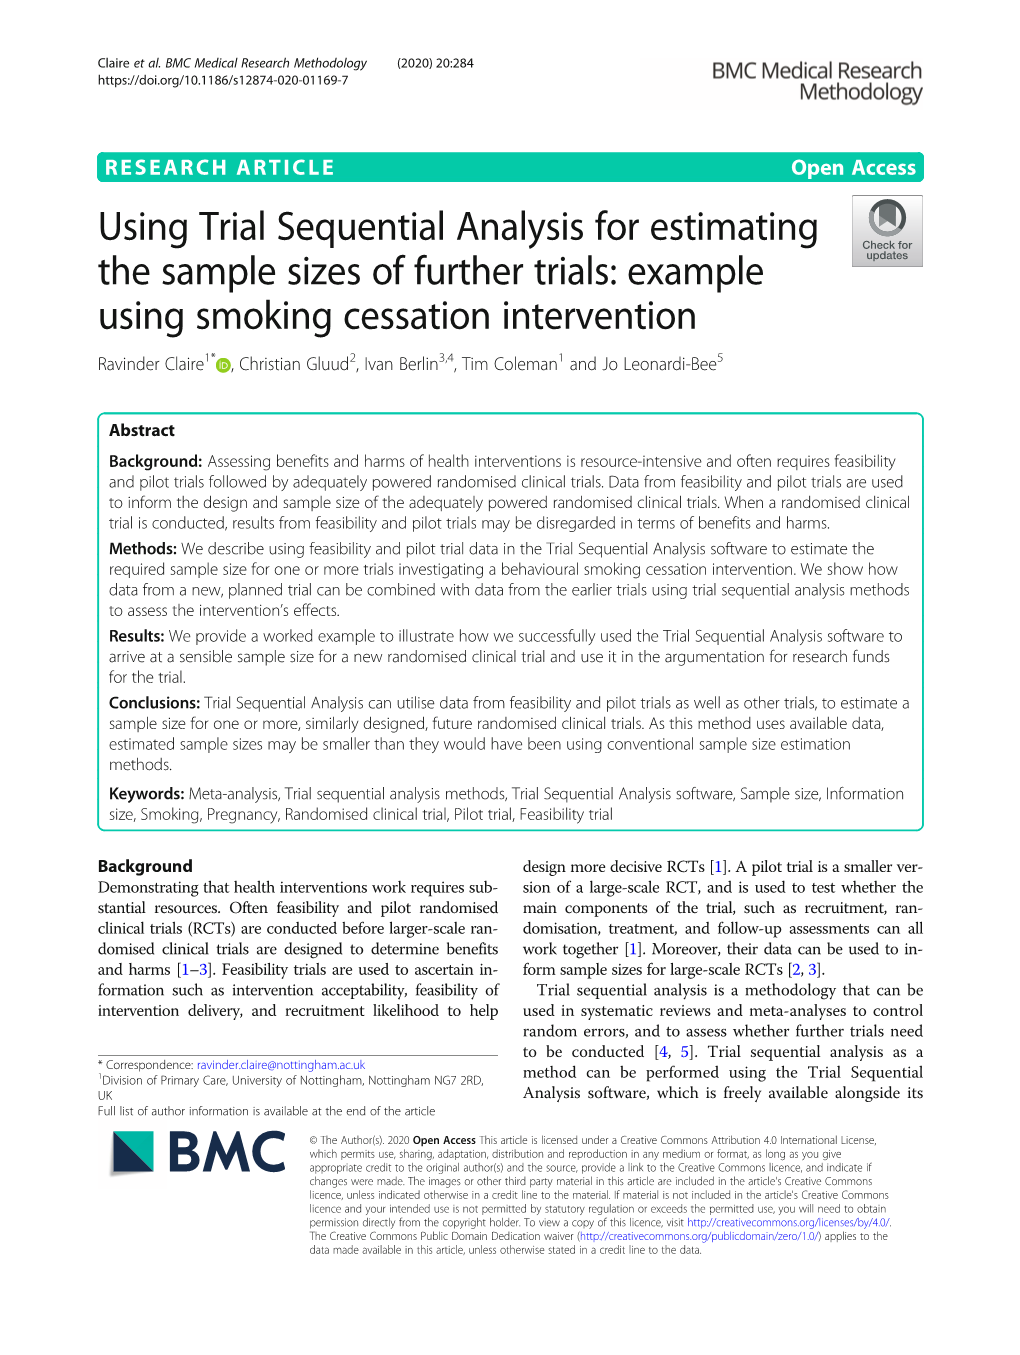 Using Trial Sequential Analysis For